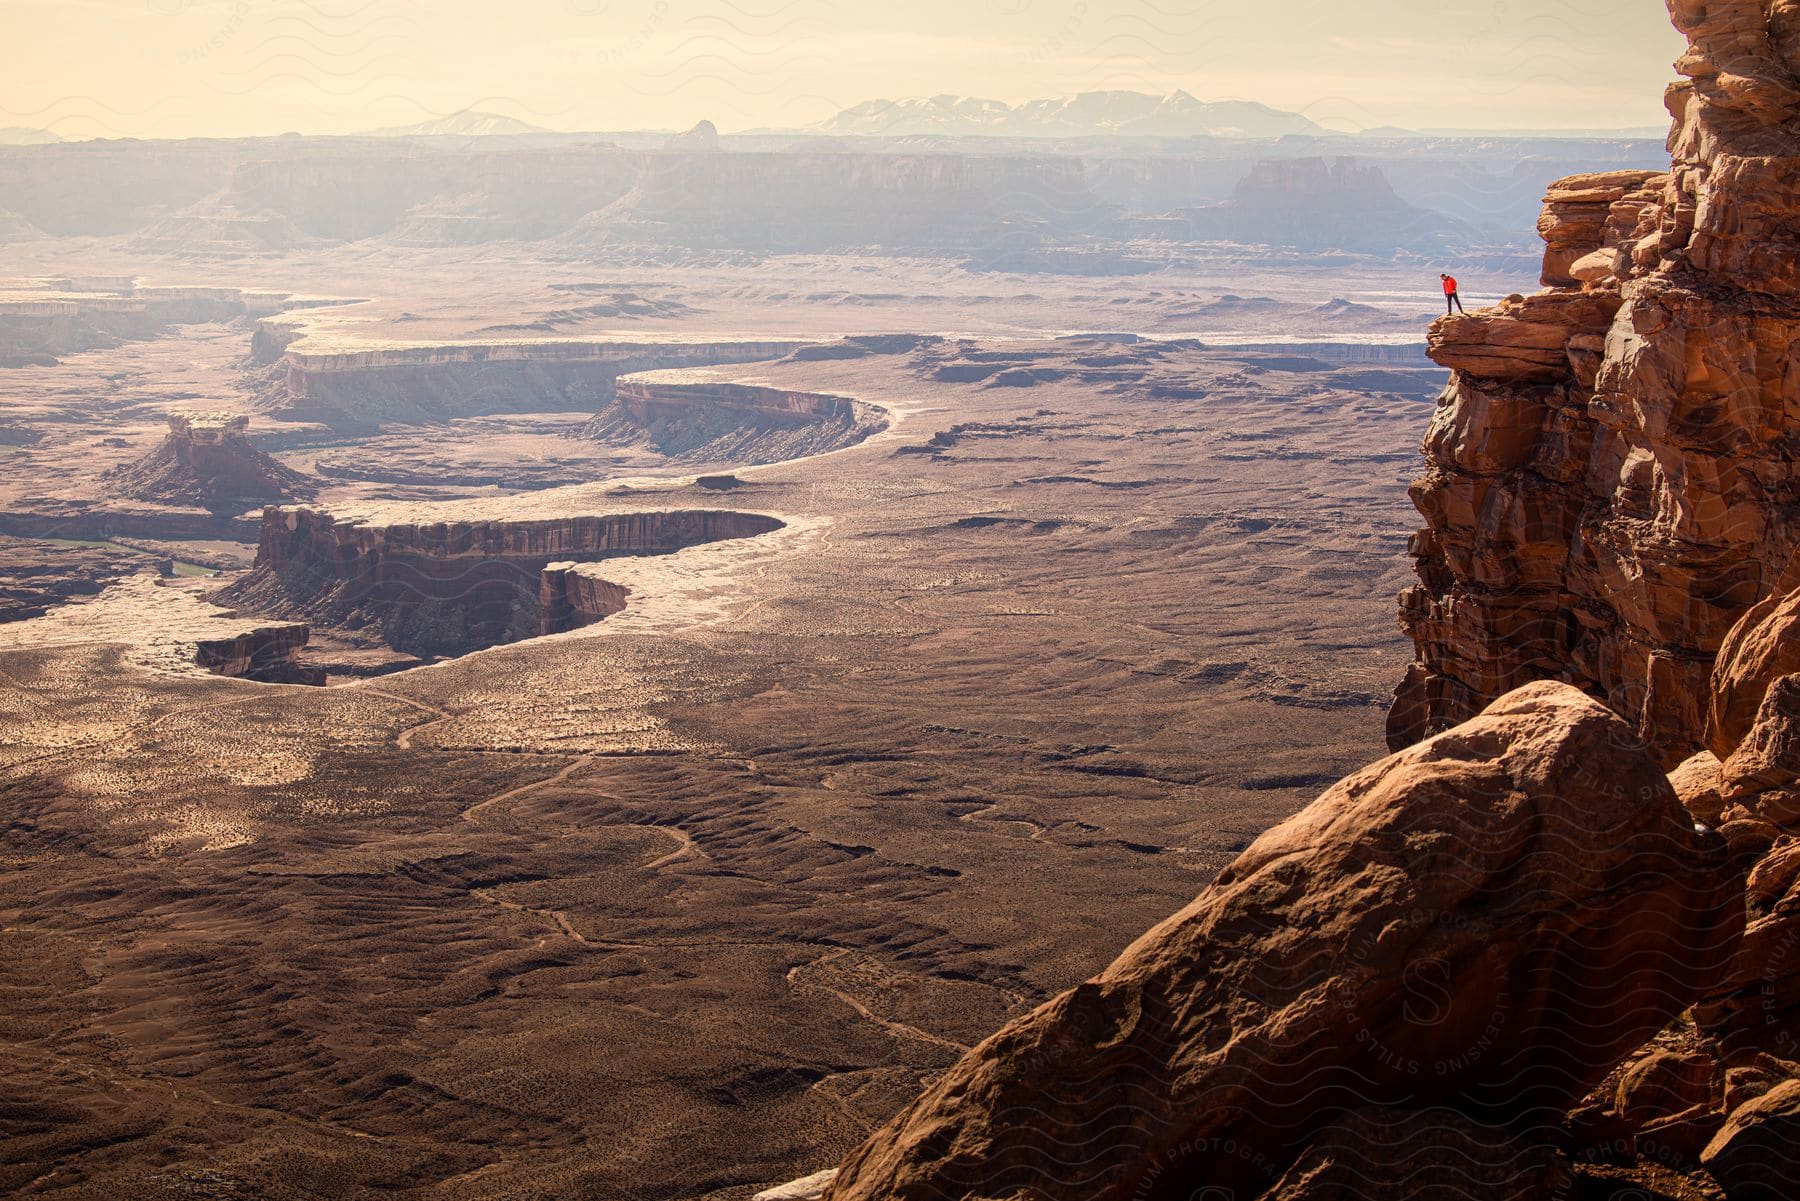 A hiker gazes over a cliff at a panoramic view of canyons mesas and mountains on a hazy day